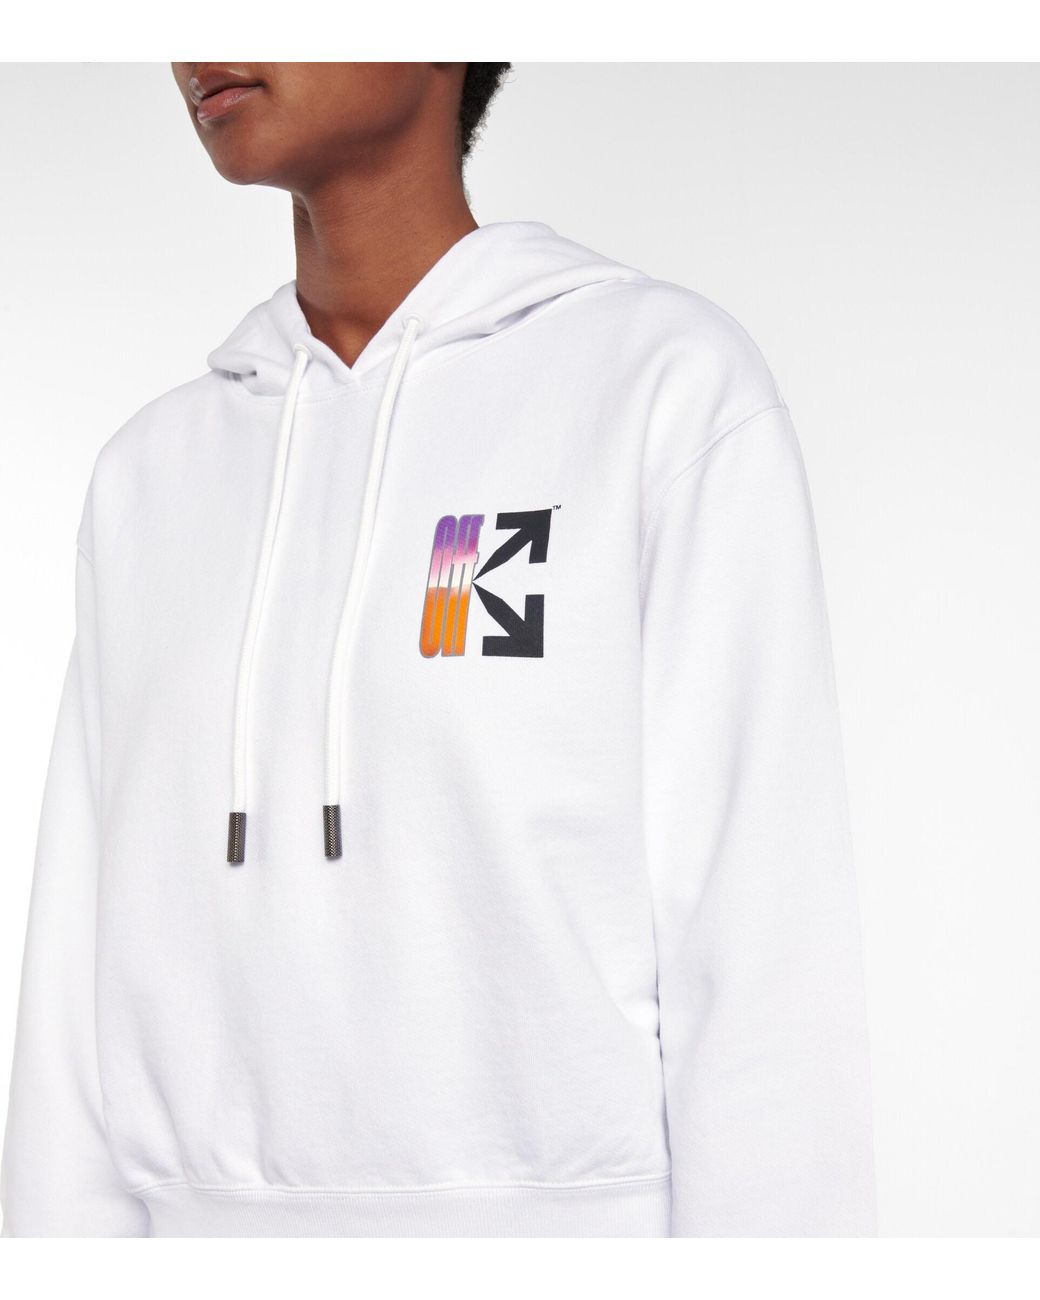 Off-White c/o Virgil Abloh Logo Cotton-jersey Hoodie in White | Lyst